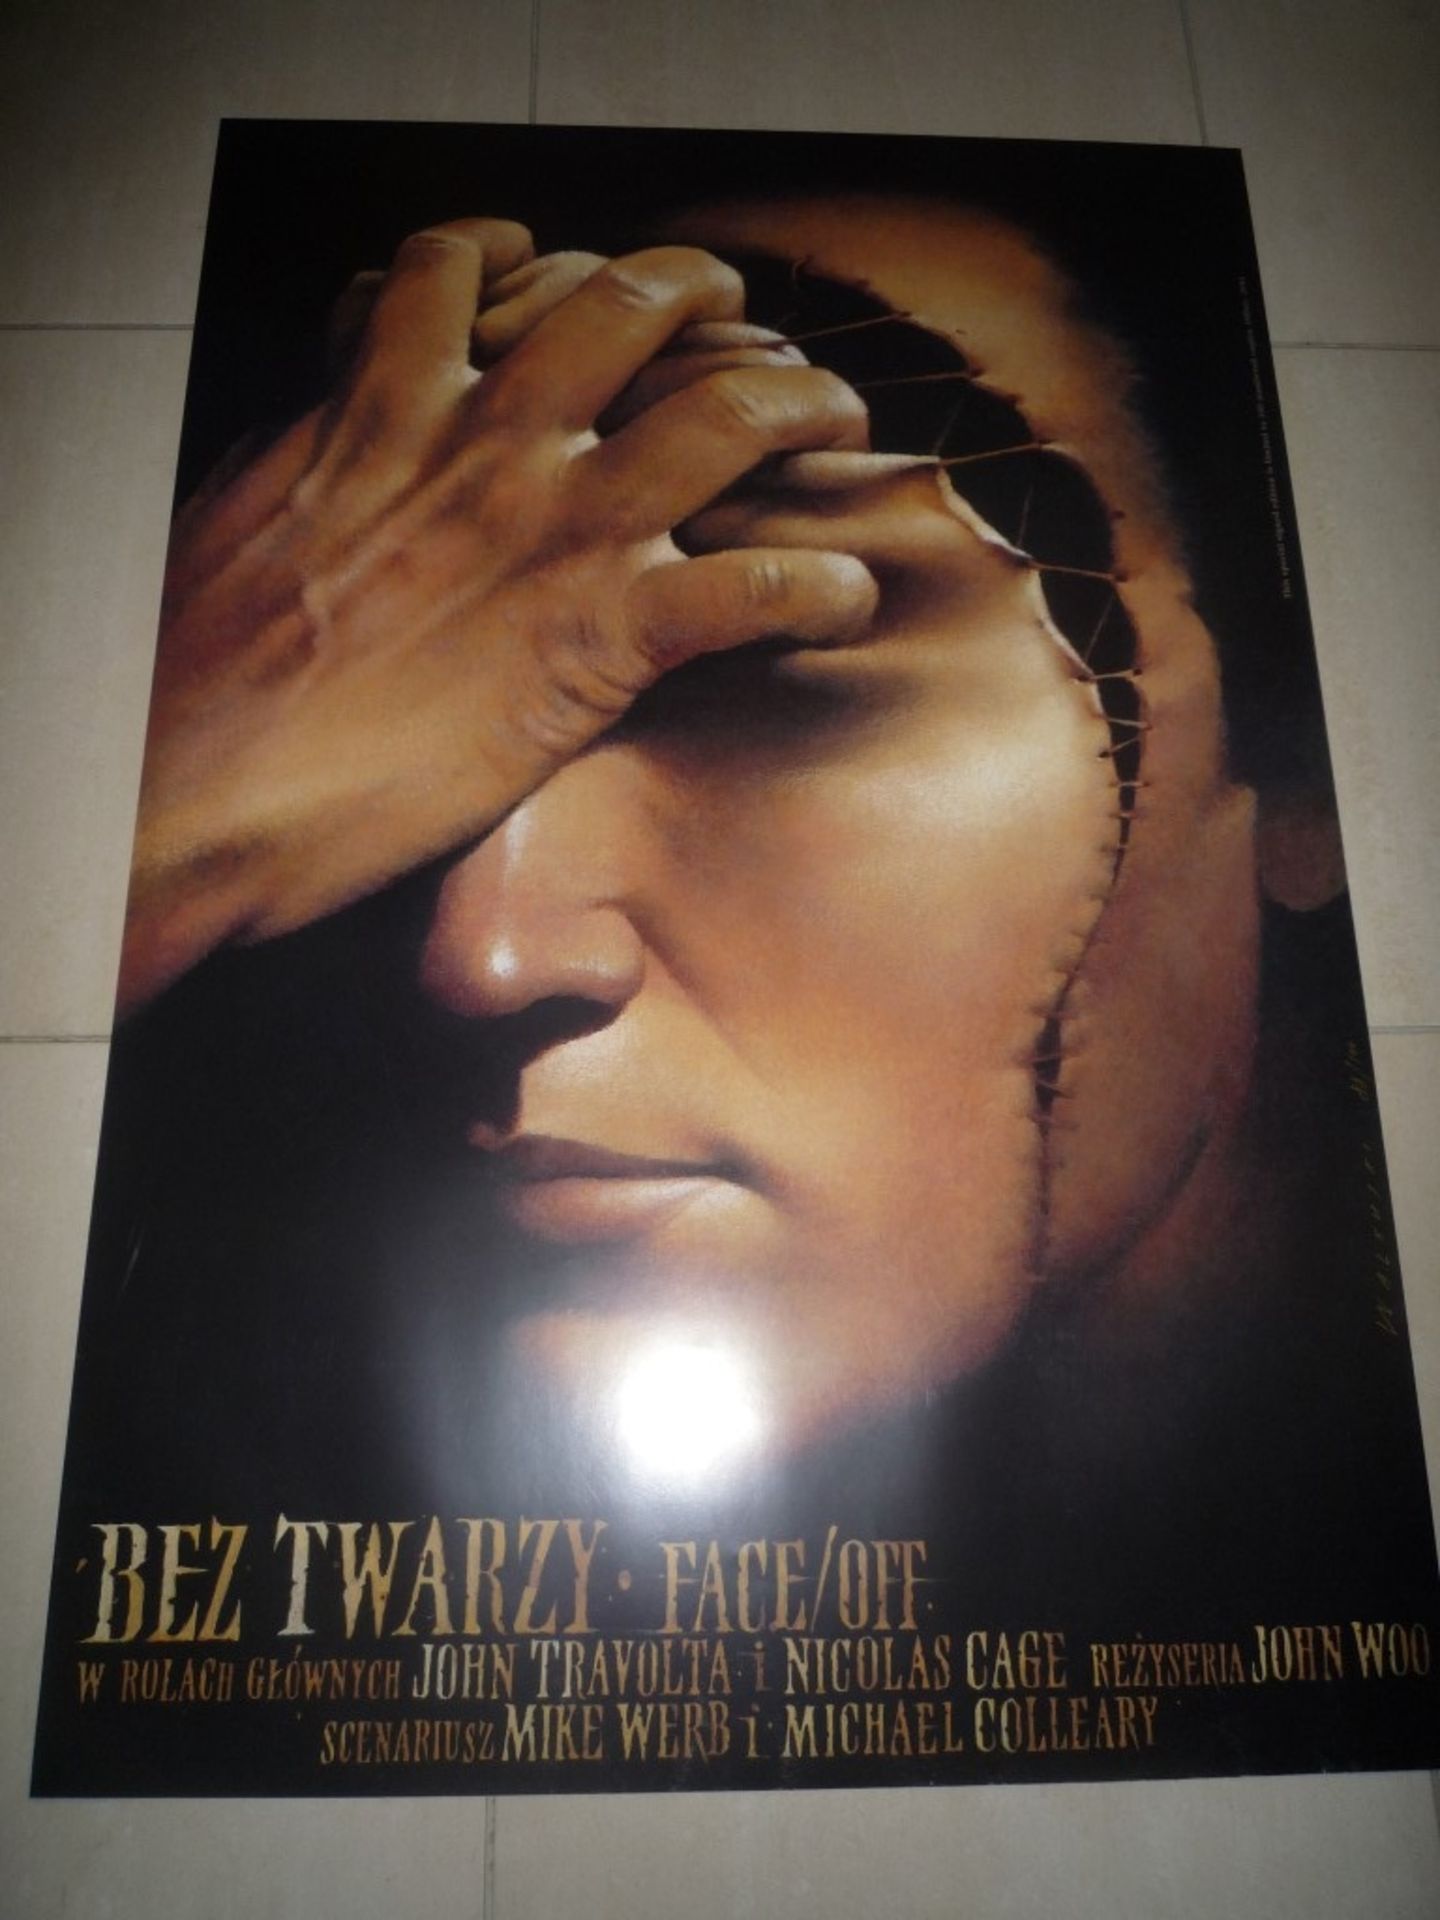 Face/Off Travolta/Cage poster